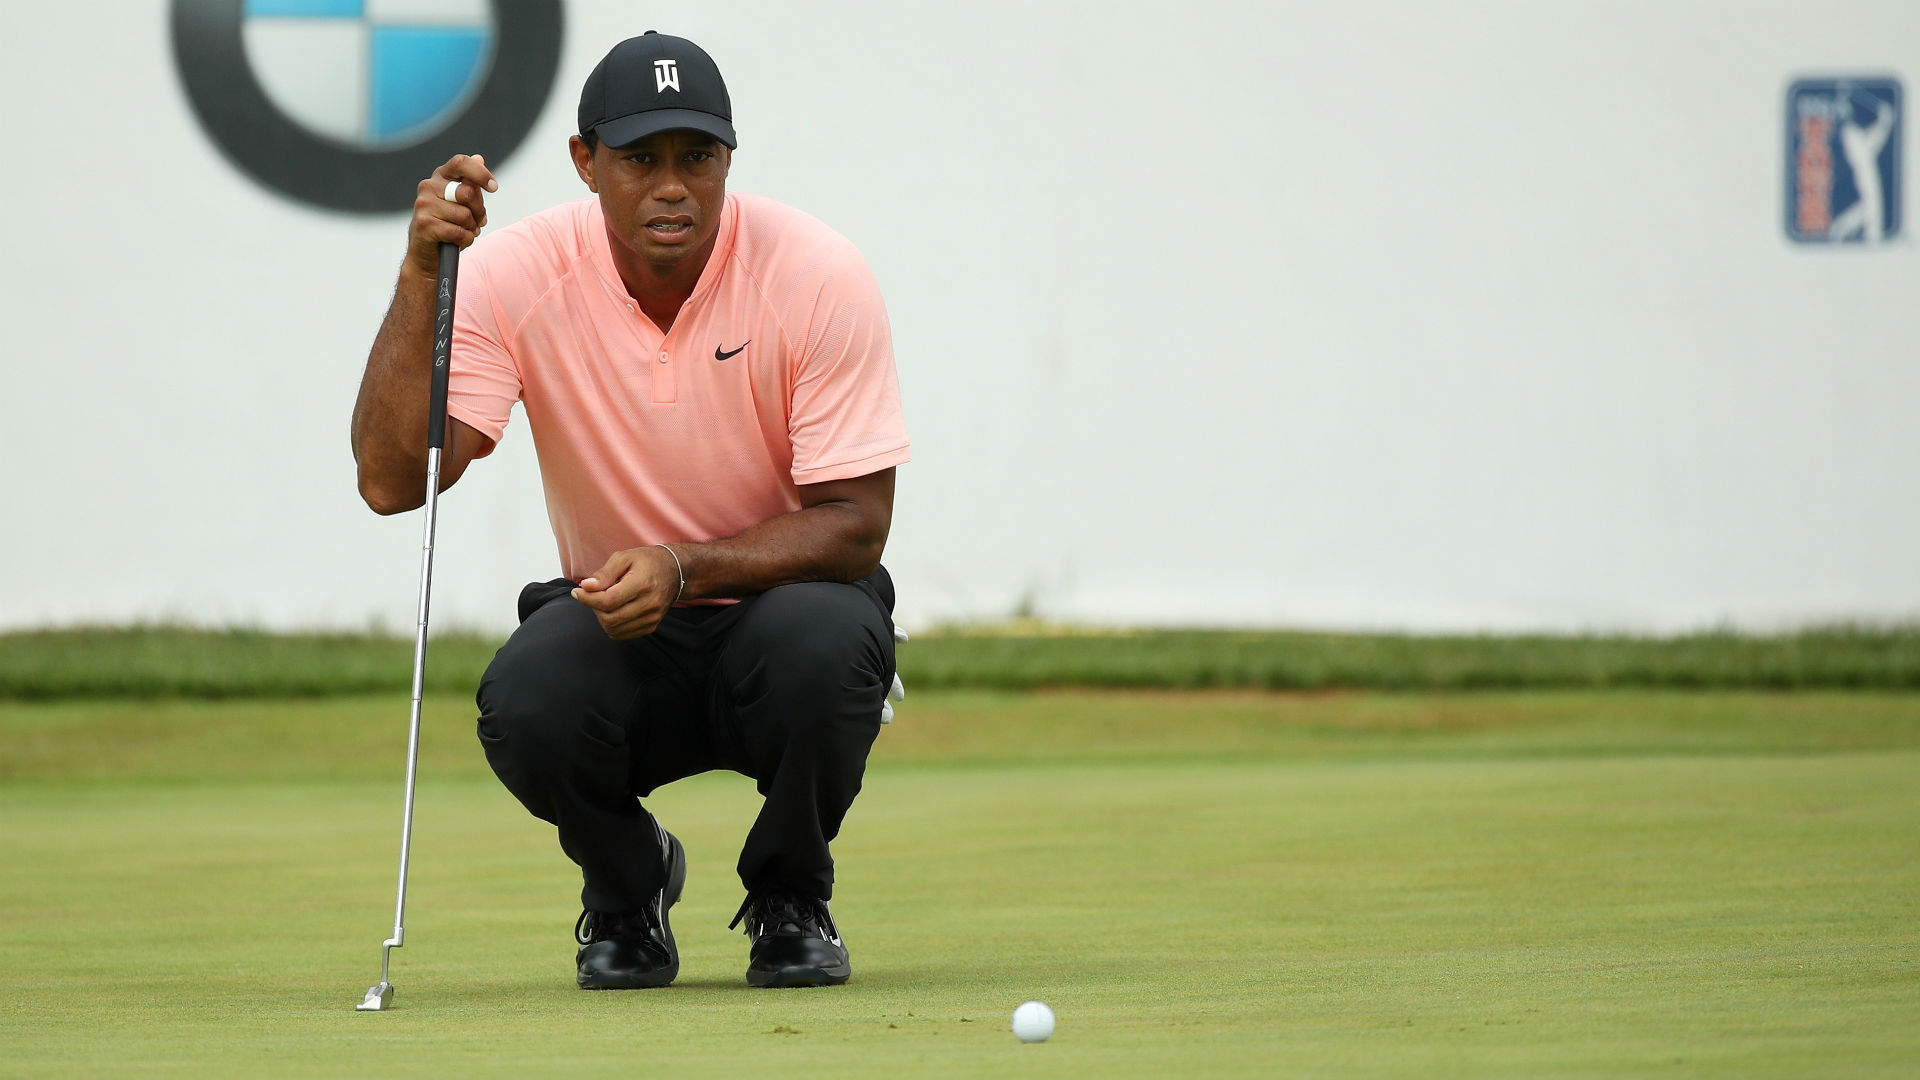 Tiger Woods' score, highlights from Round 3 of BMW Championship | Golf | Sporting News1920 x 1080